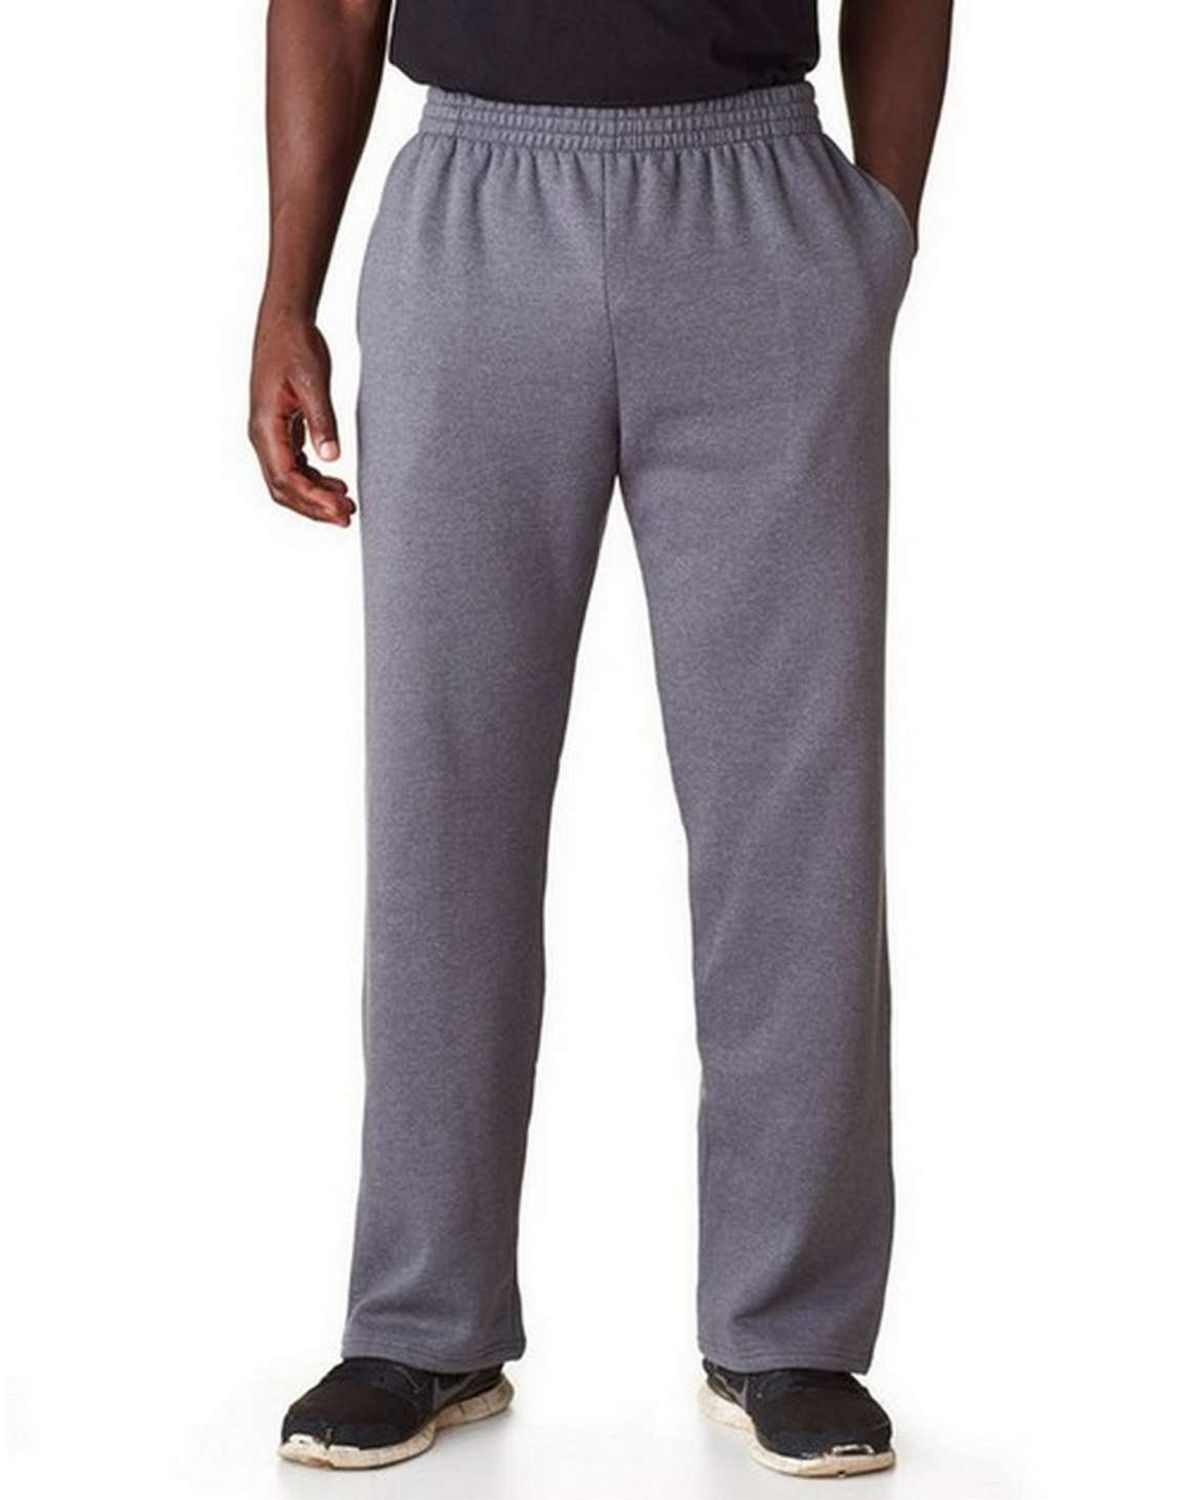 Fruit Of The Loom SF74 Adult Sofspun Open-Bottom Sweatpants with Pockets